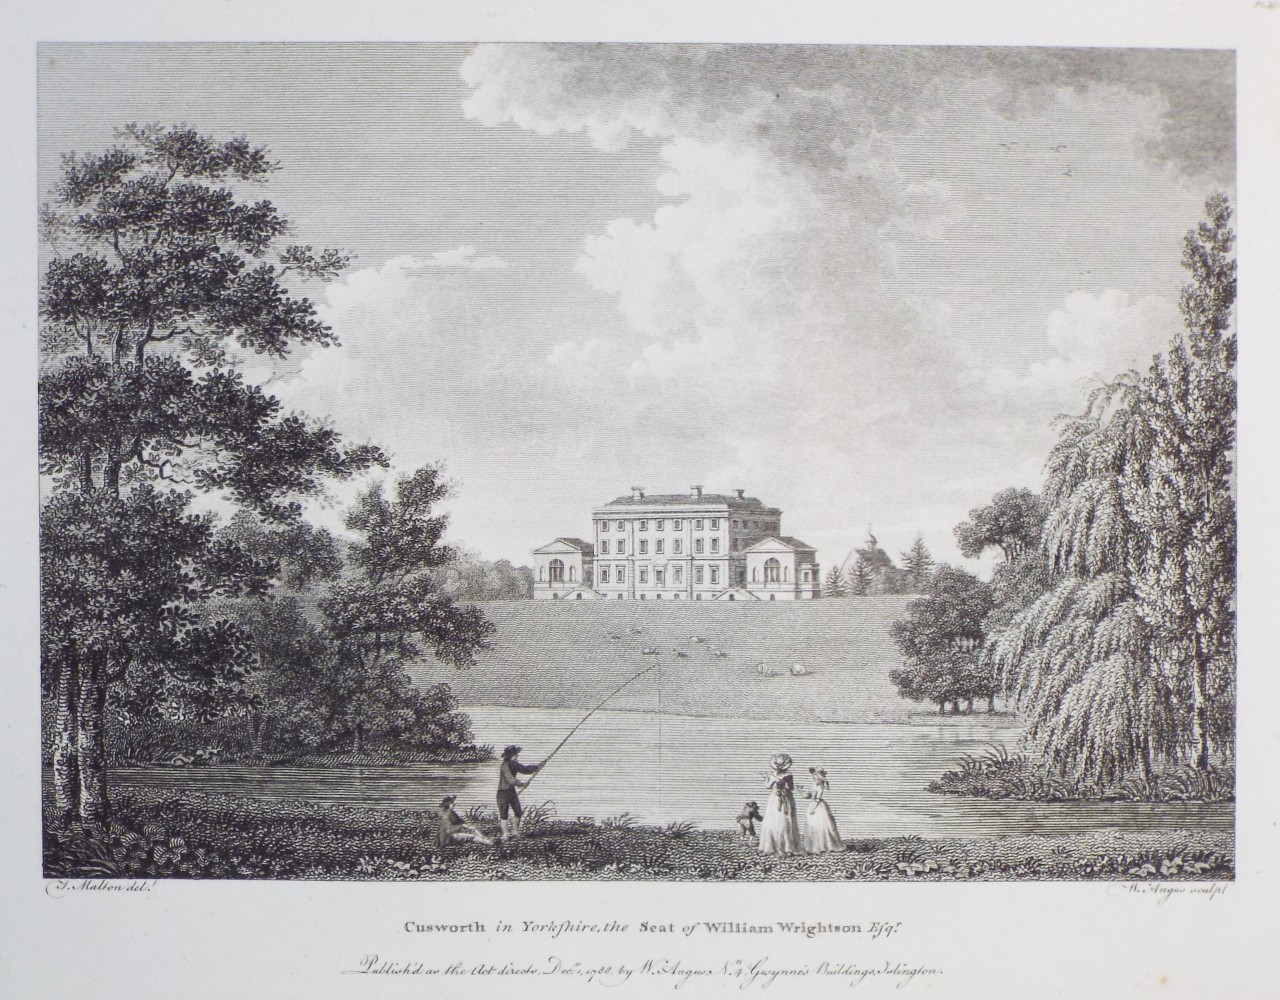 Print - Cusworth in Yorkshire, the Seat of William Wrightson Esqr. - Angus